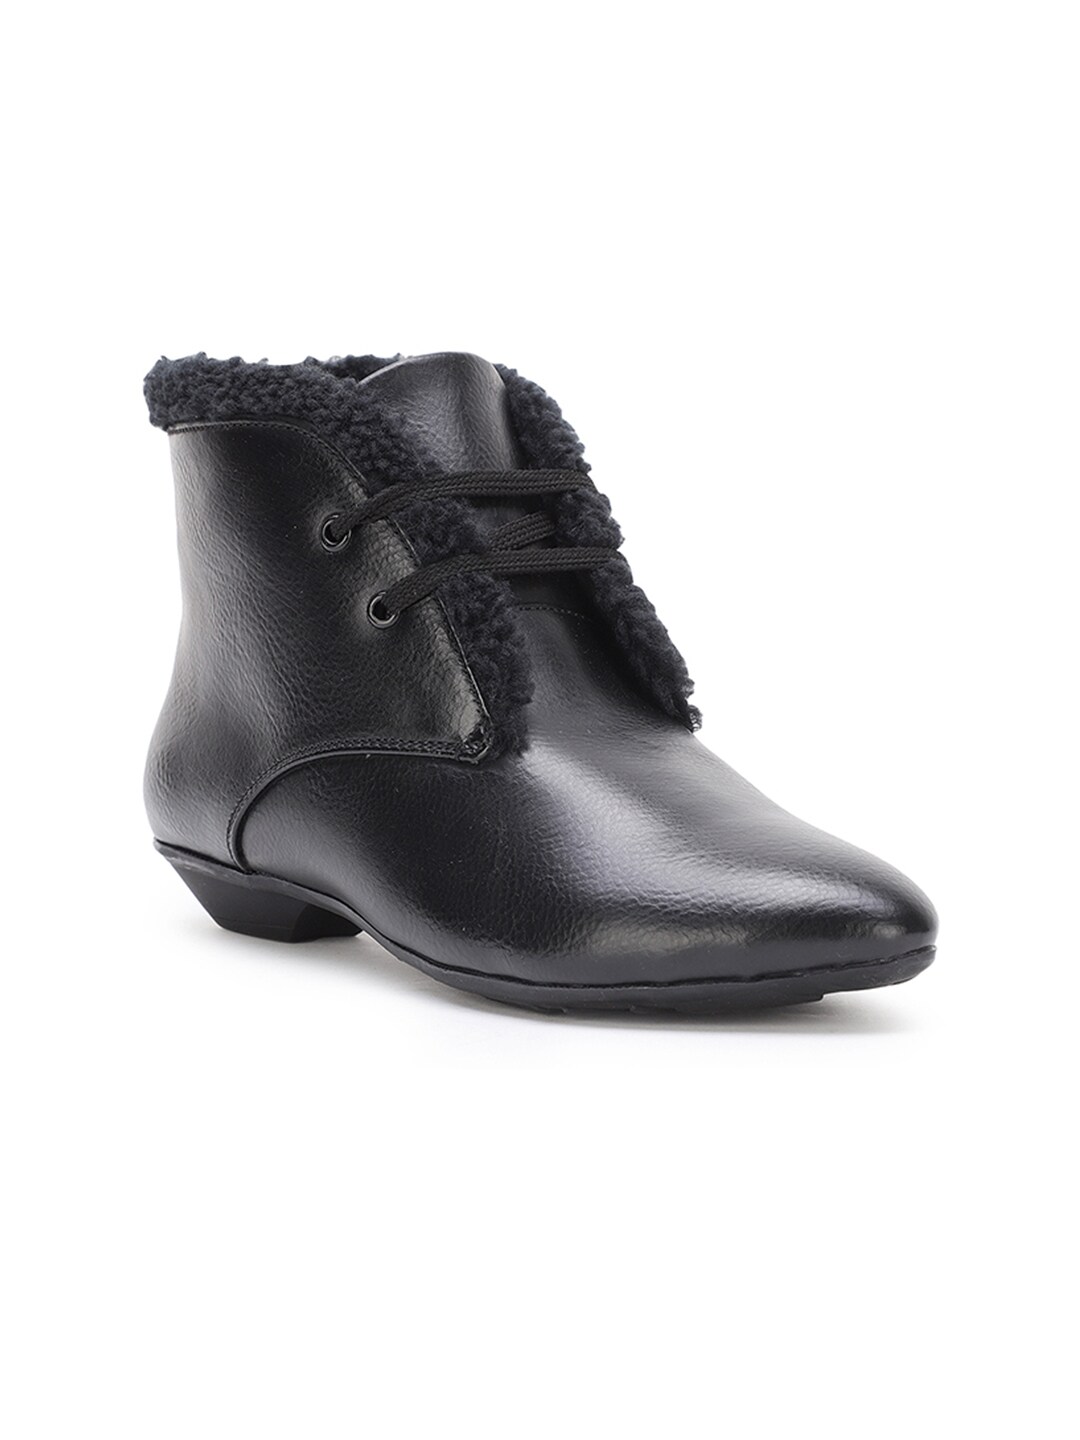 Bruno Manetti Women Black Solid Heeled Boots Price in India